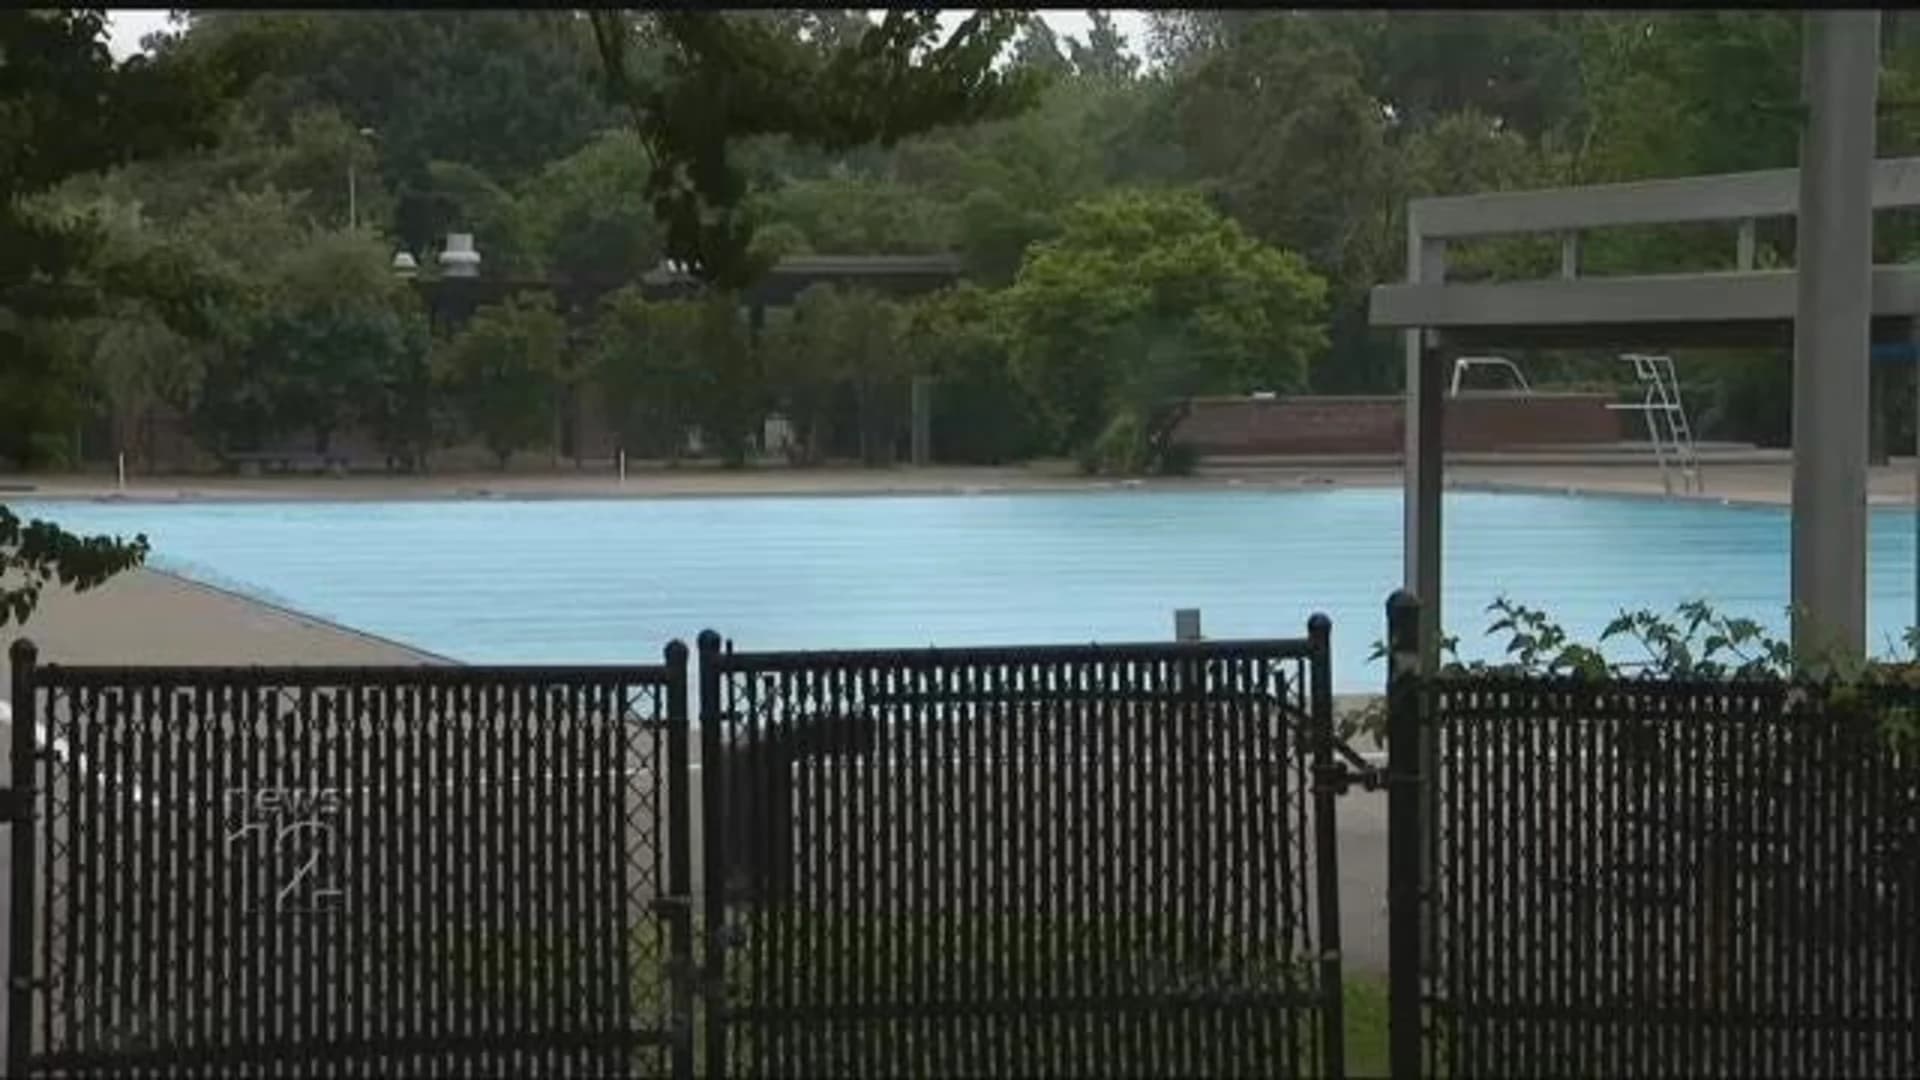 Town of Oyster Bay reopening 2 community pools Saturday